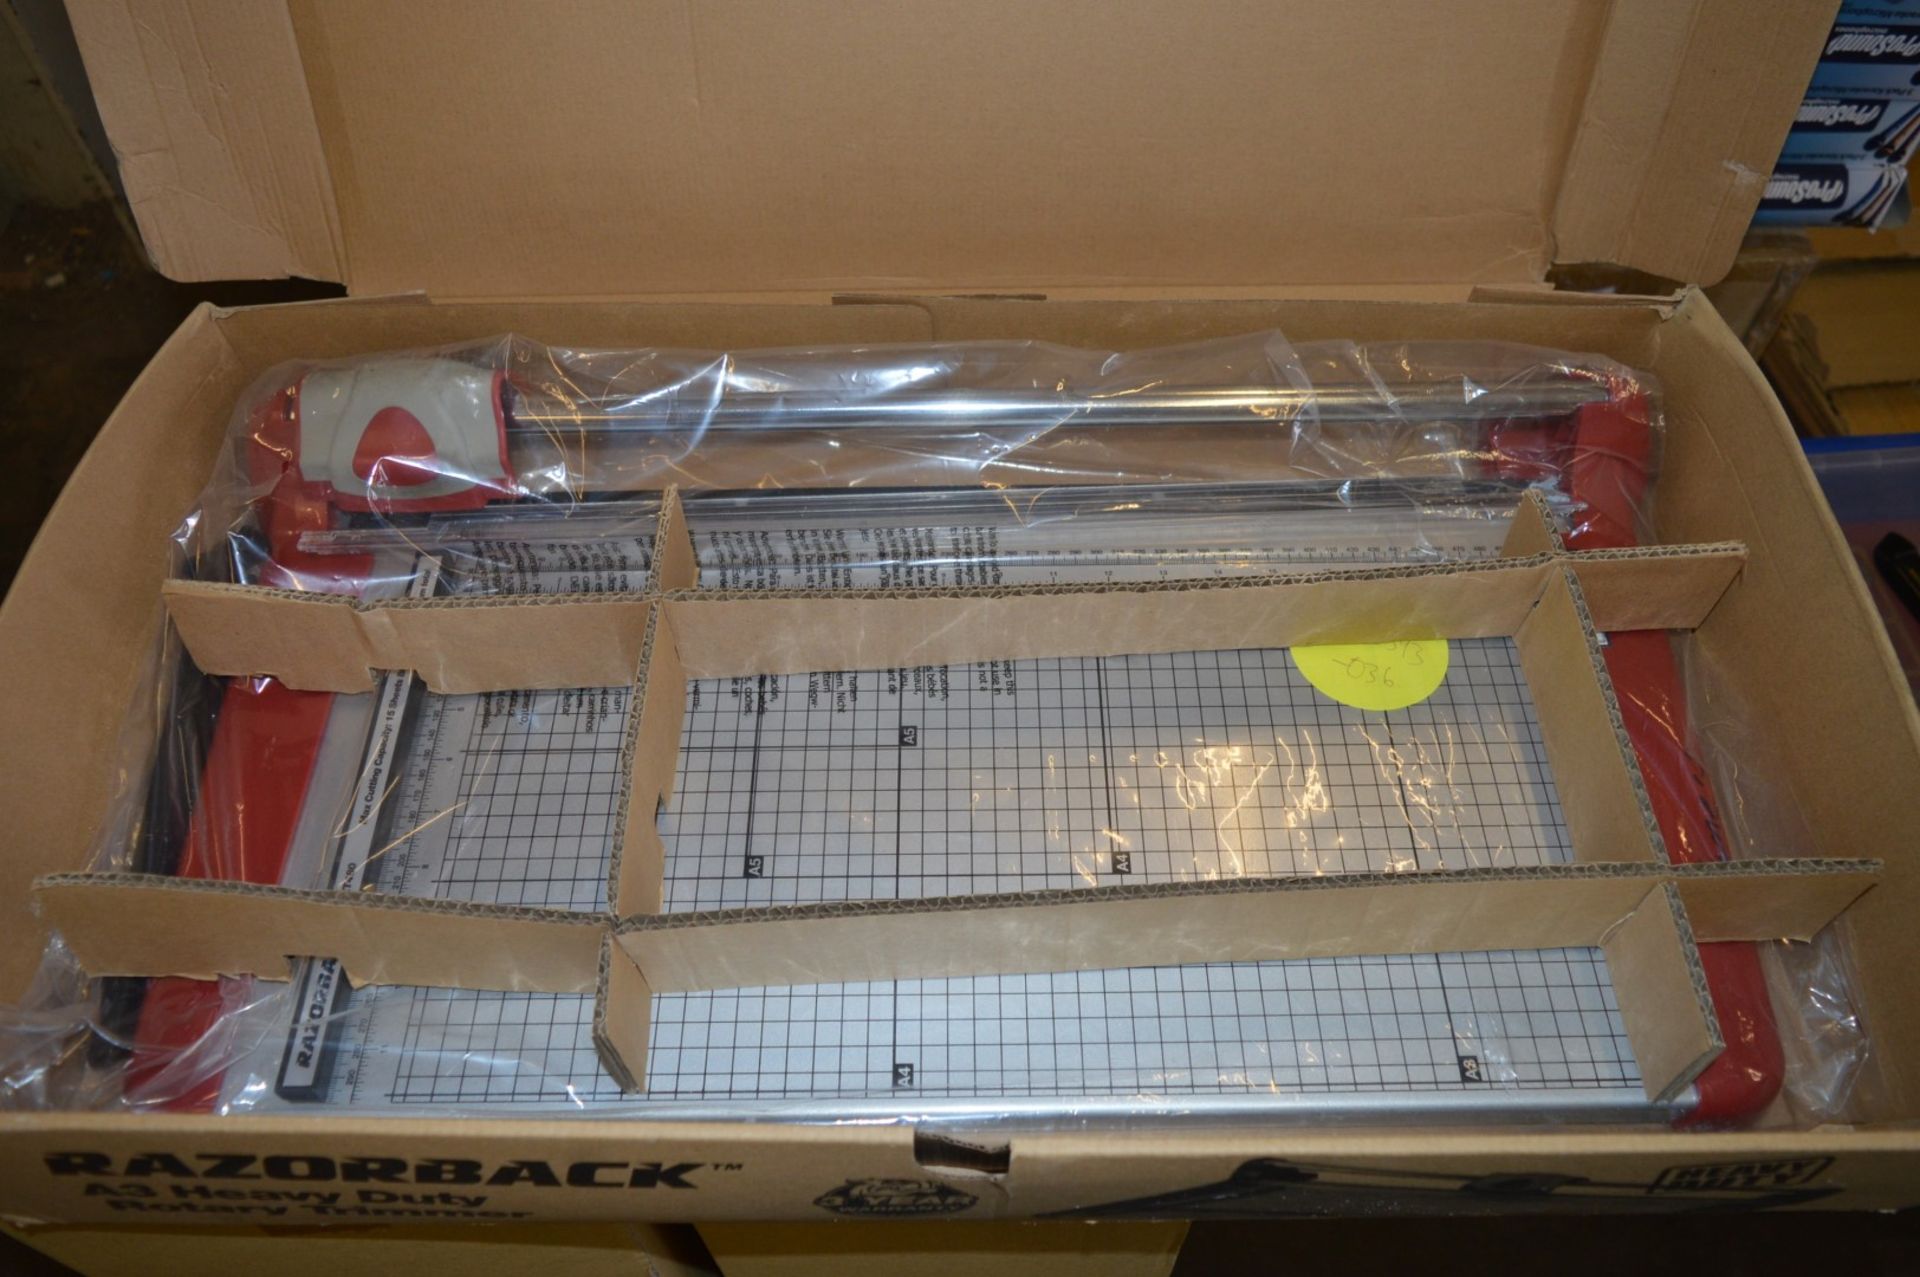 1 x Razorback A3 Heavy Duty Rotary Paper Trimmer - Unused in Original Box - Self Sharpening - Strong - Image 4 of 7